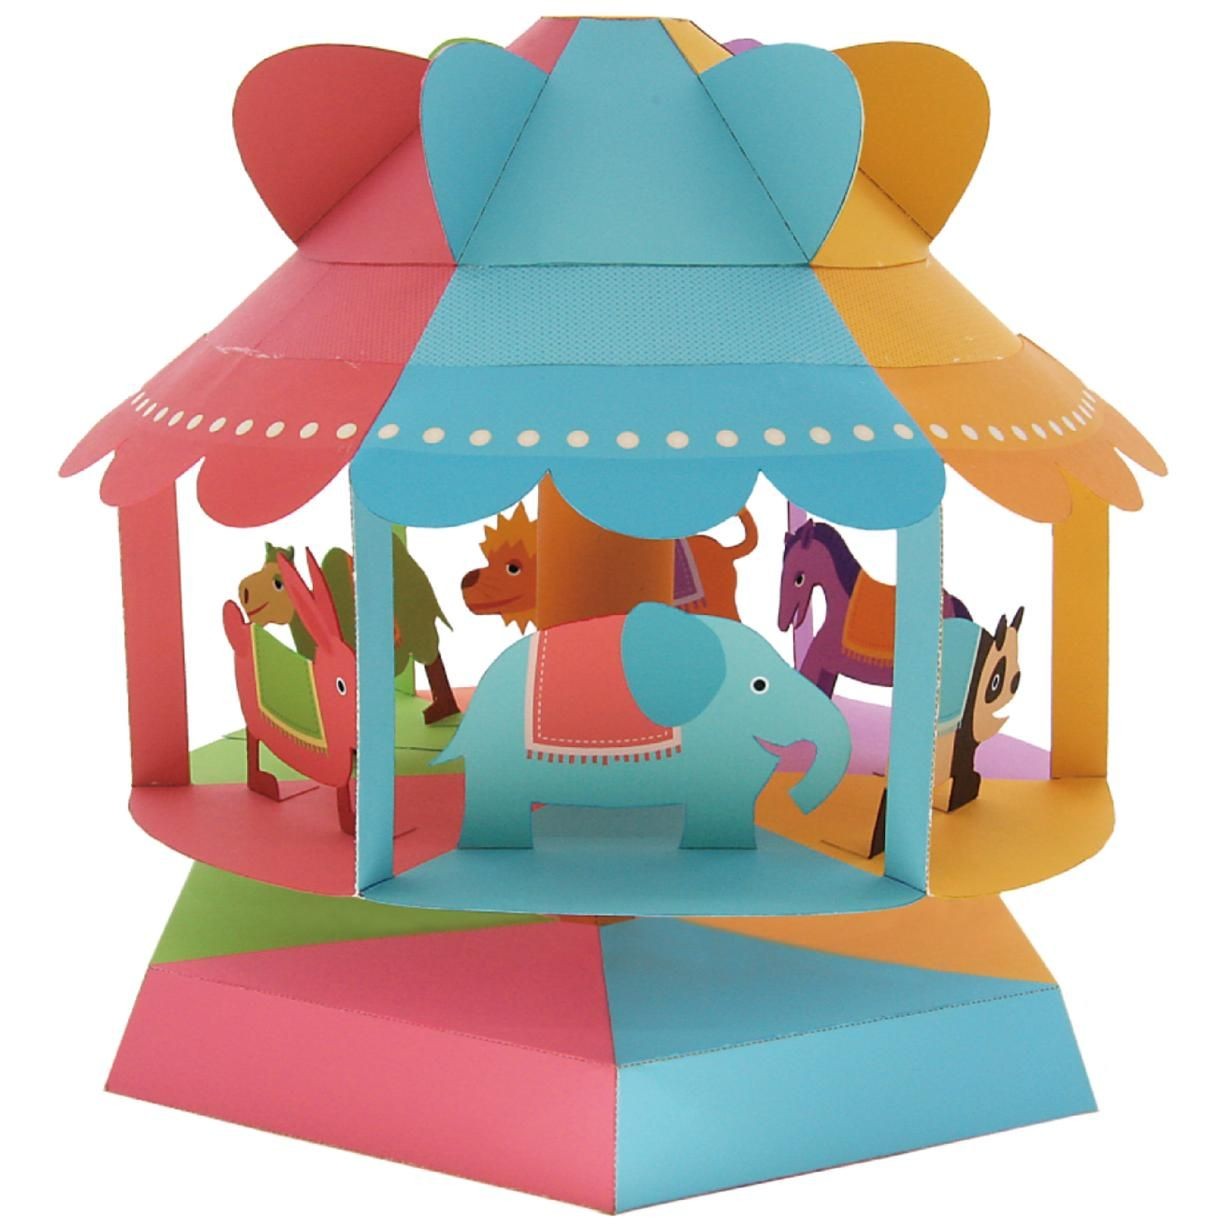 Canon 3d Papercraft Wind Powered Merry Go Round toys Paper Craft Educational Rabbit